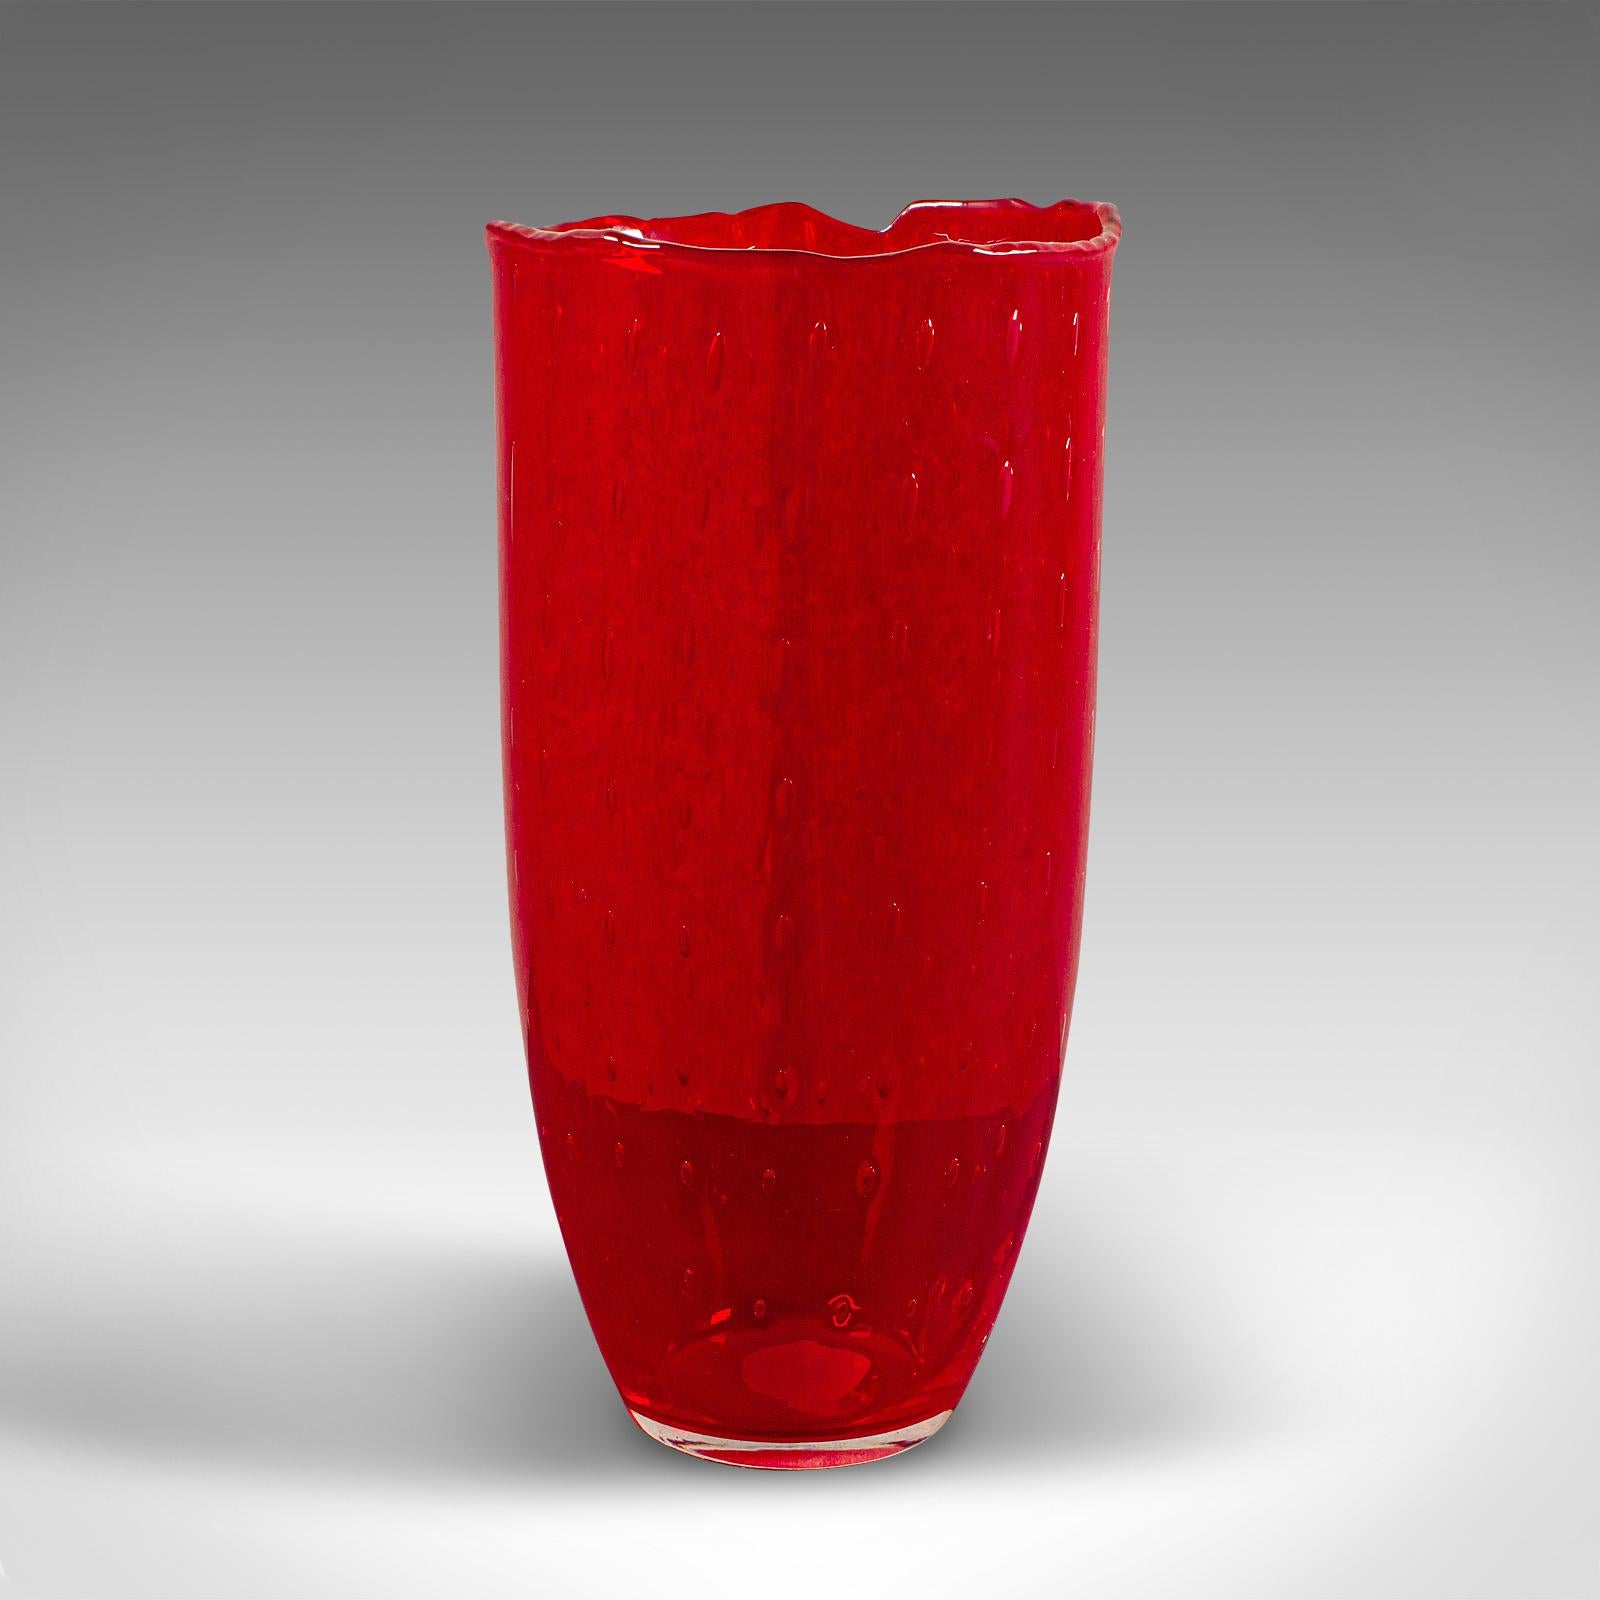 
This is a large vintage display vase. An Italian, art glass flower pot, dating to the late 20th century, circa 1970.

Fascinating late 20th century vase with strong visual appeal
Displays a desirable aged patina and in good original order
Rich red